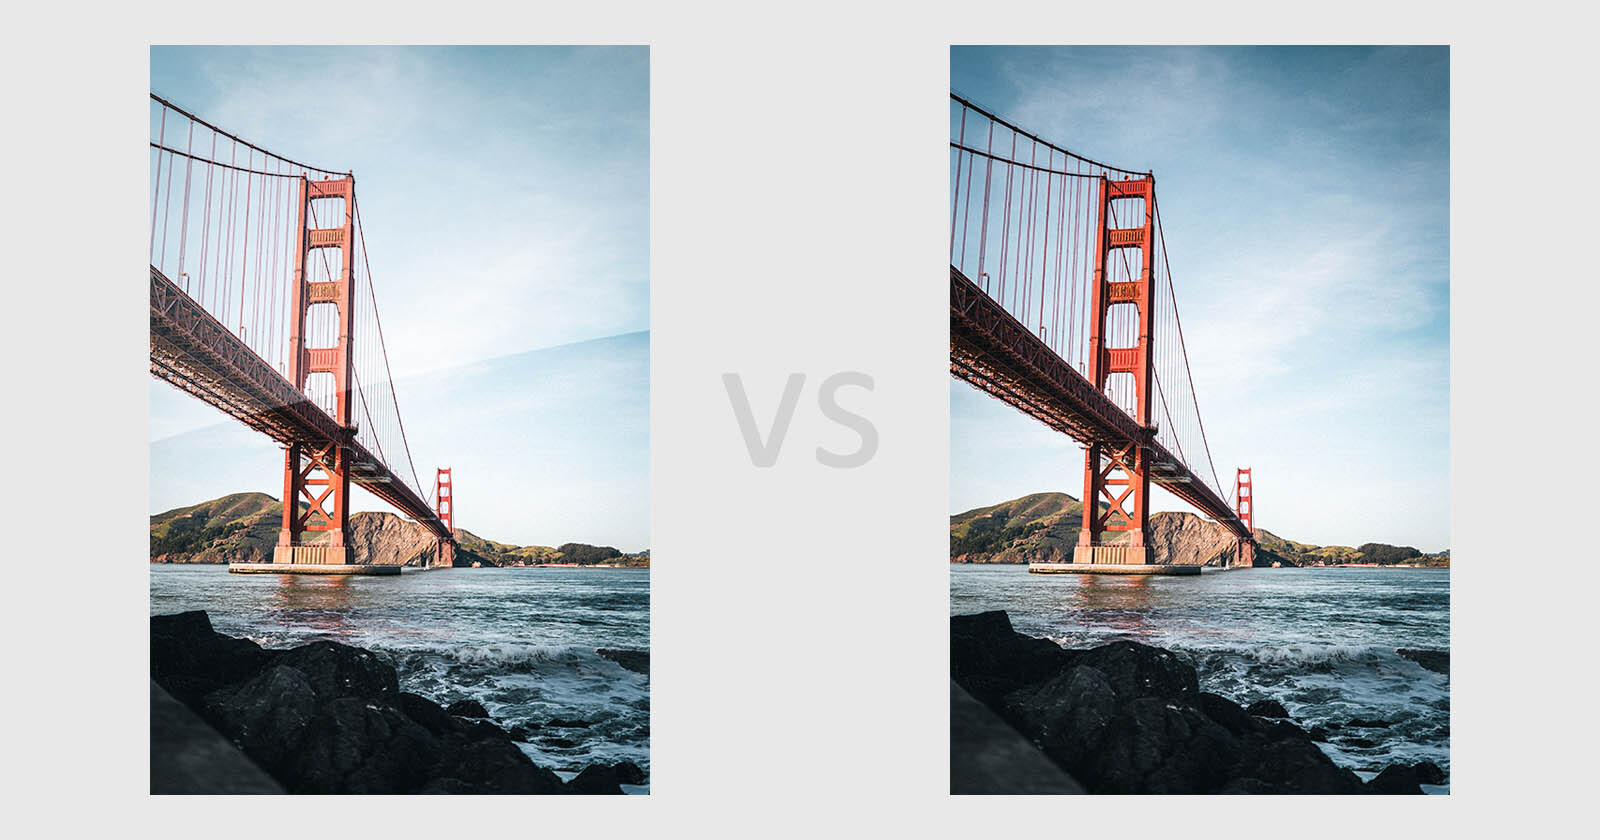 Glossy vs. Matte Photo: Which is Best for Printed Pictures?